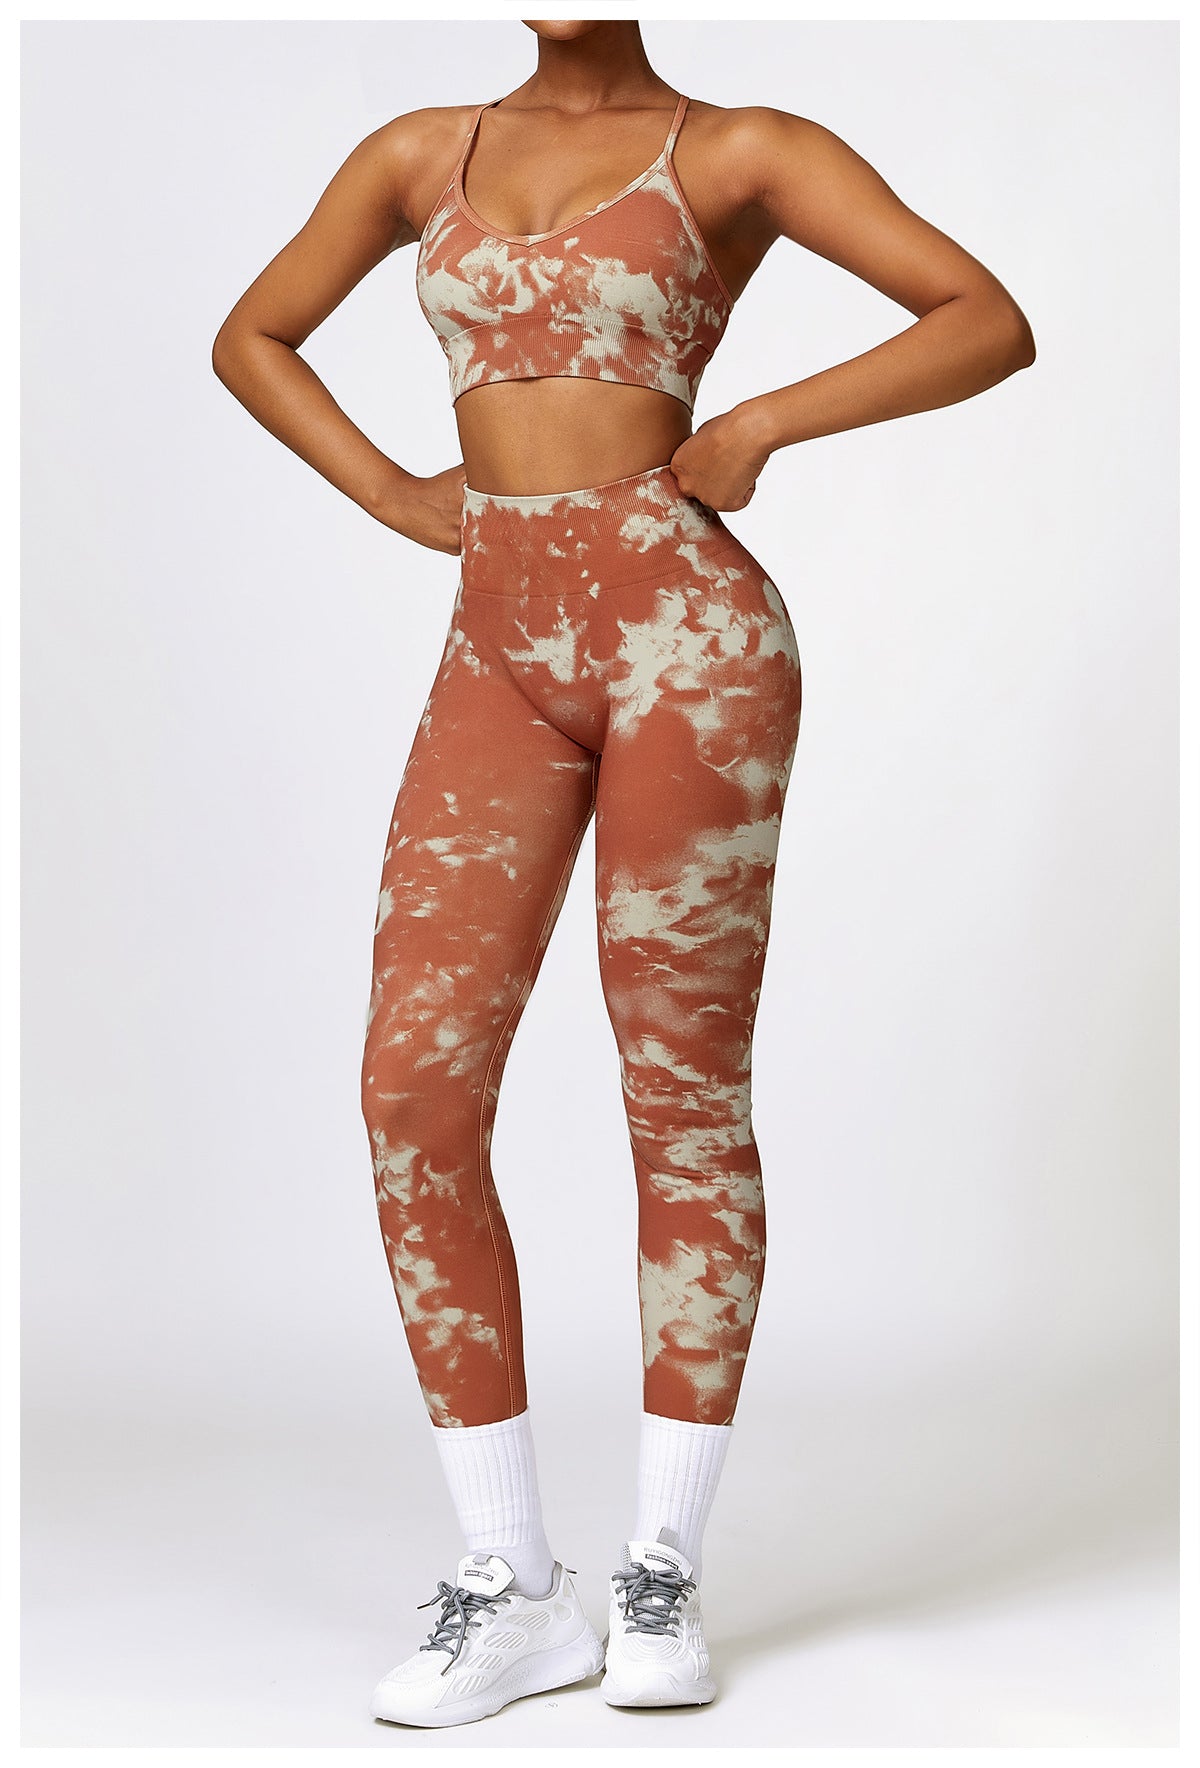 Camouflage Printing Seamless Yoga Suit Quick-drying High Waist Running Workout Clothes